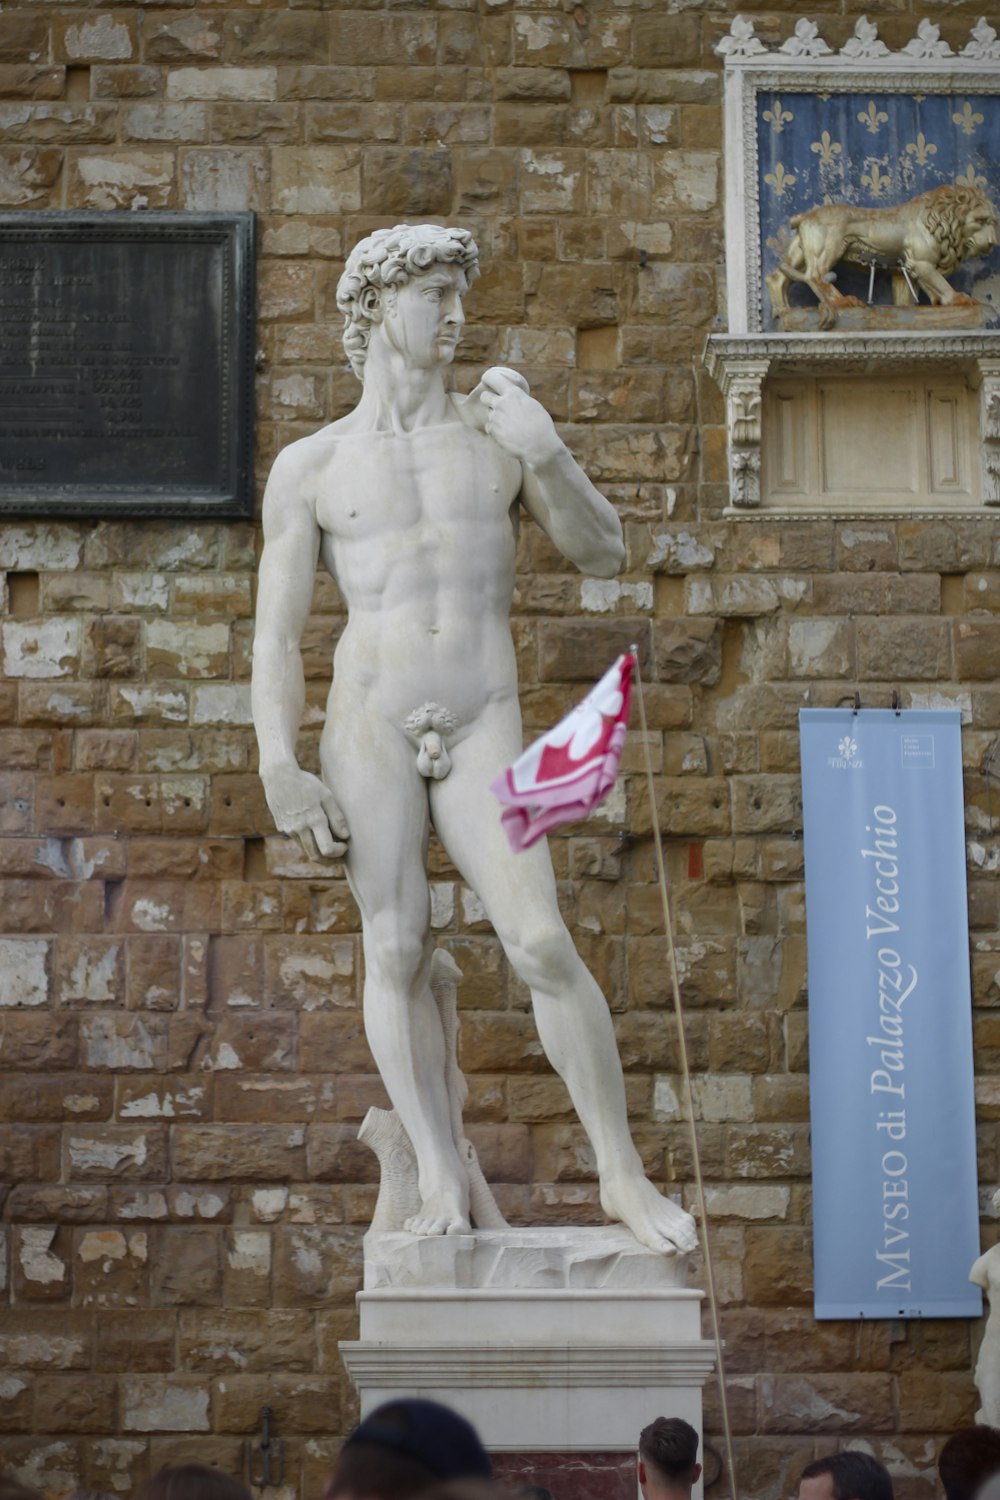 a statue of a man holding a flag in front of a brick wall